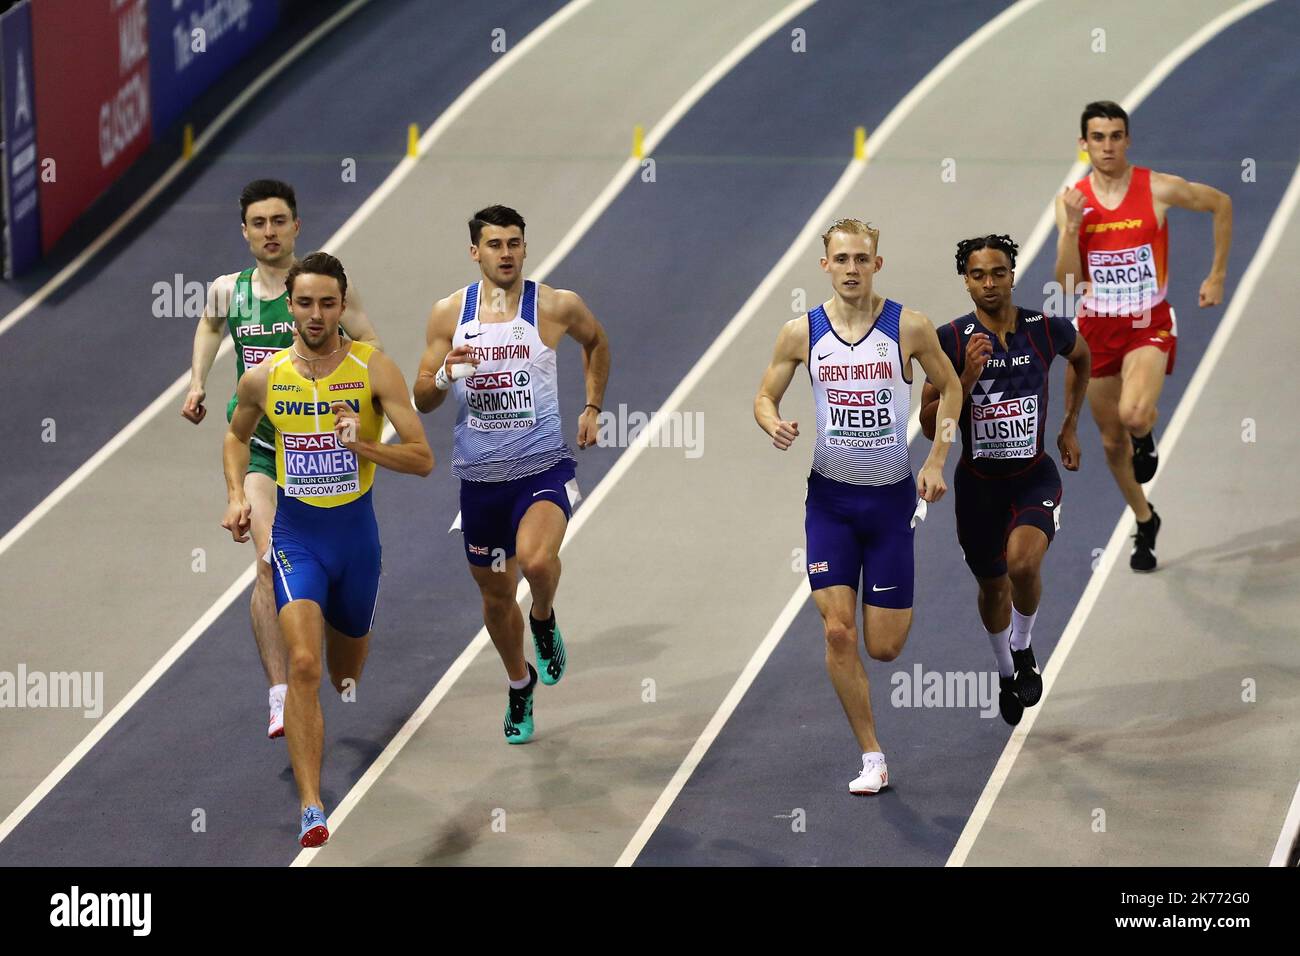 Andreas Kramer of Sweden , Guy Learmonth of Great Britain , Jamie Webb of Great Britain ,Aymeric Lusine of France and Mariano Garcia of Spain 800 m Semi - Final Heat 2 during the European Athletics Indoor Championships  Glasgow 2019 on March 2, 2019 at the Emirates Arena in Glasgow, Scotland - Photo Laurent Lairys / MAXPPP Stock Photo